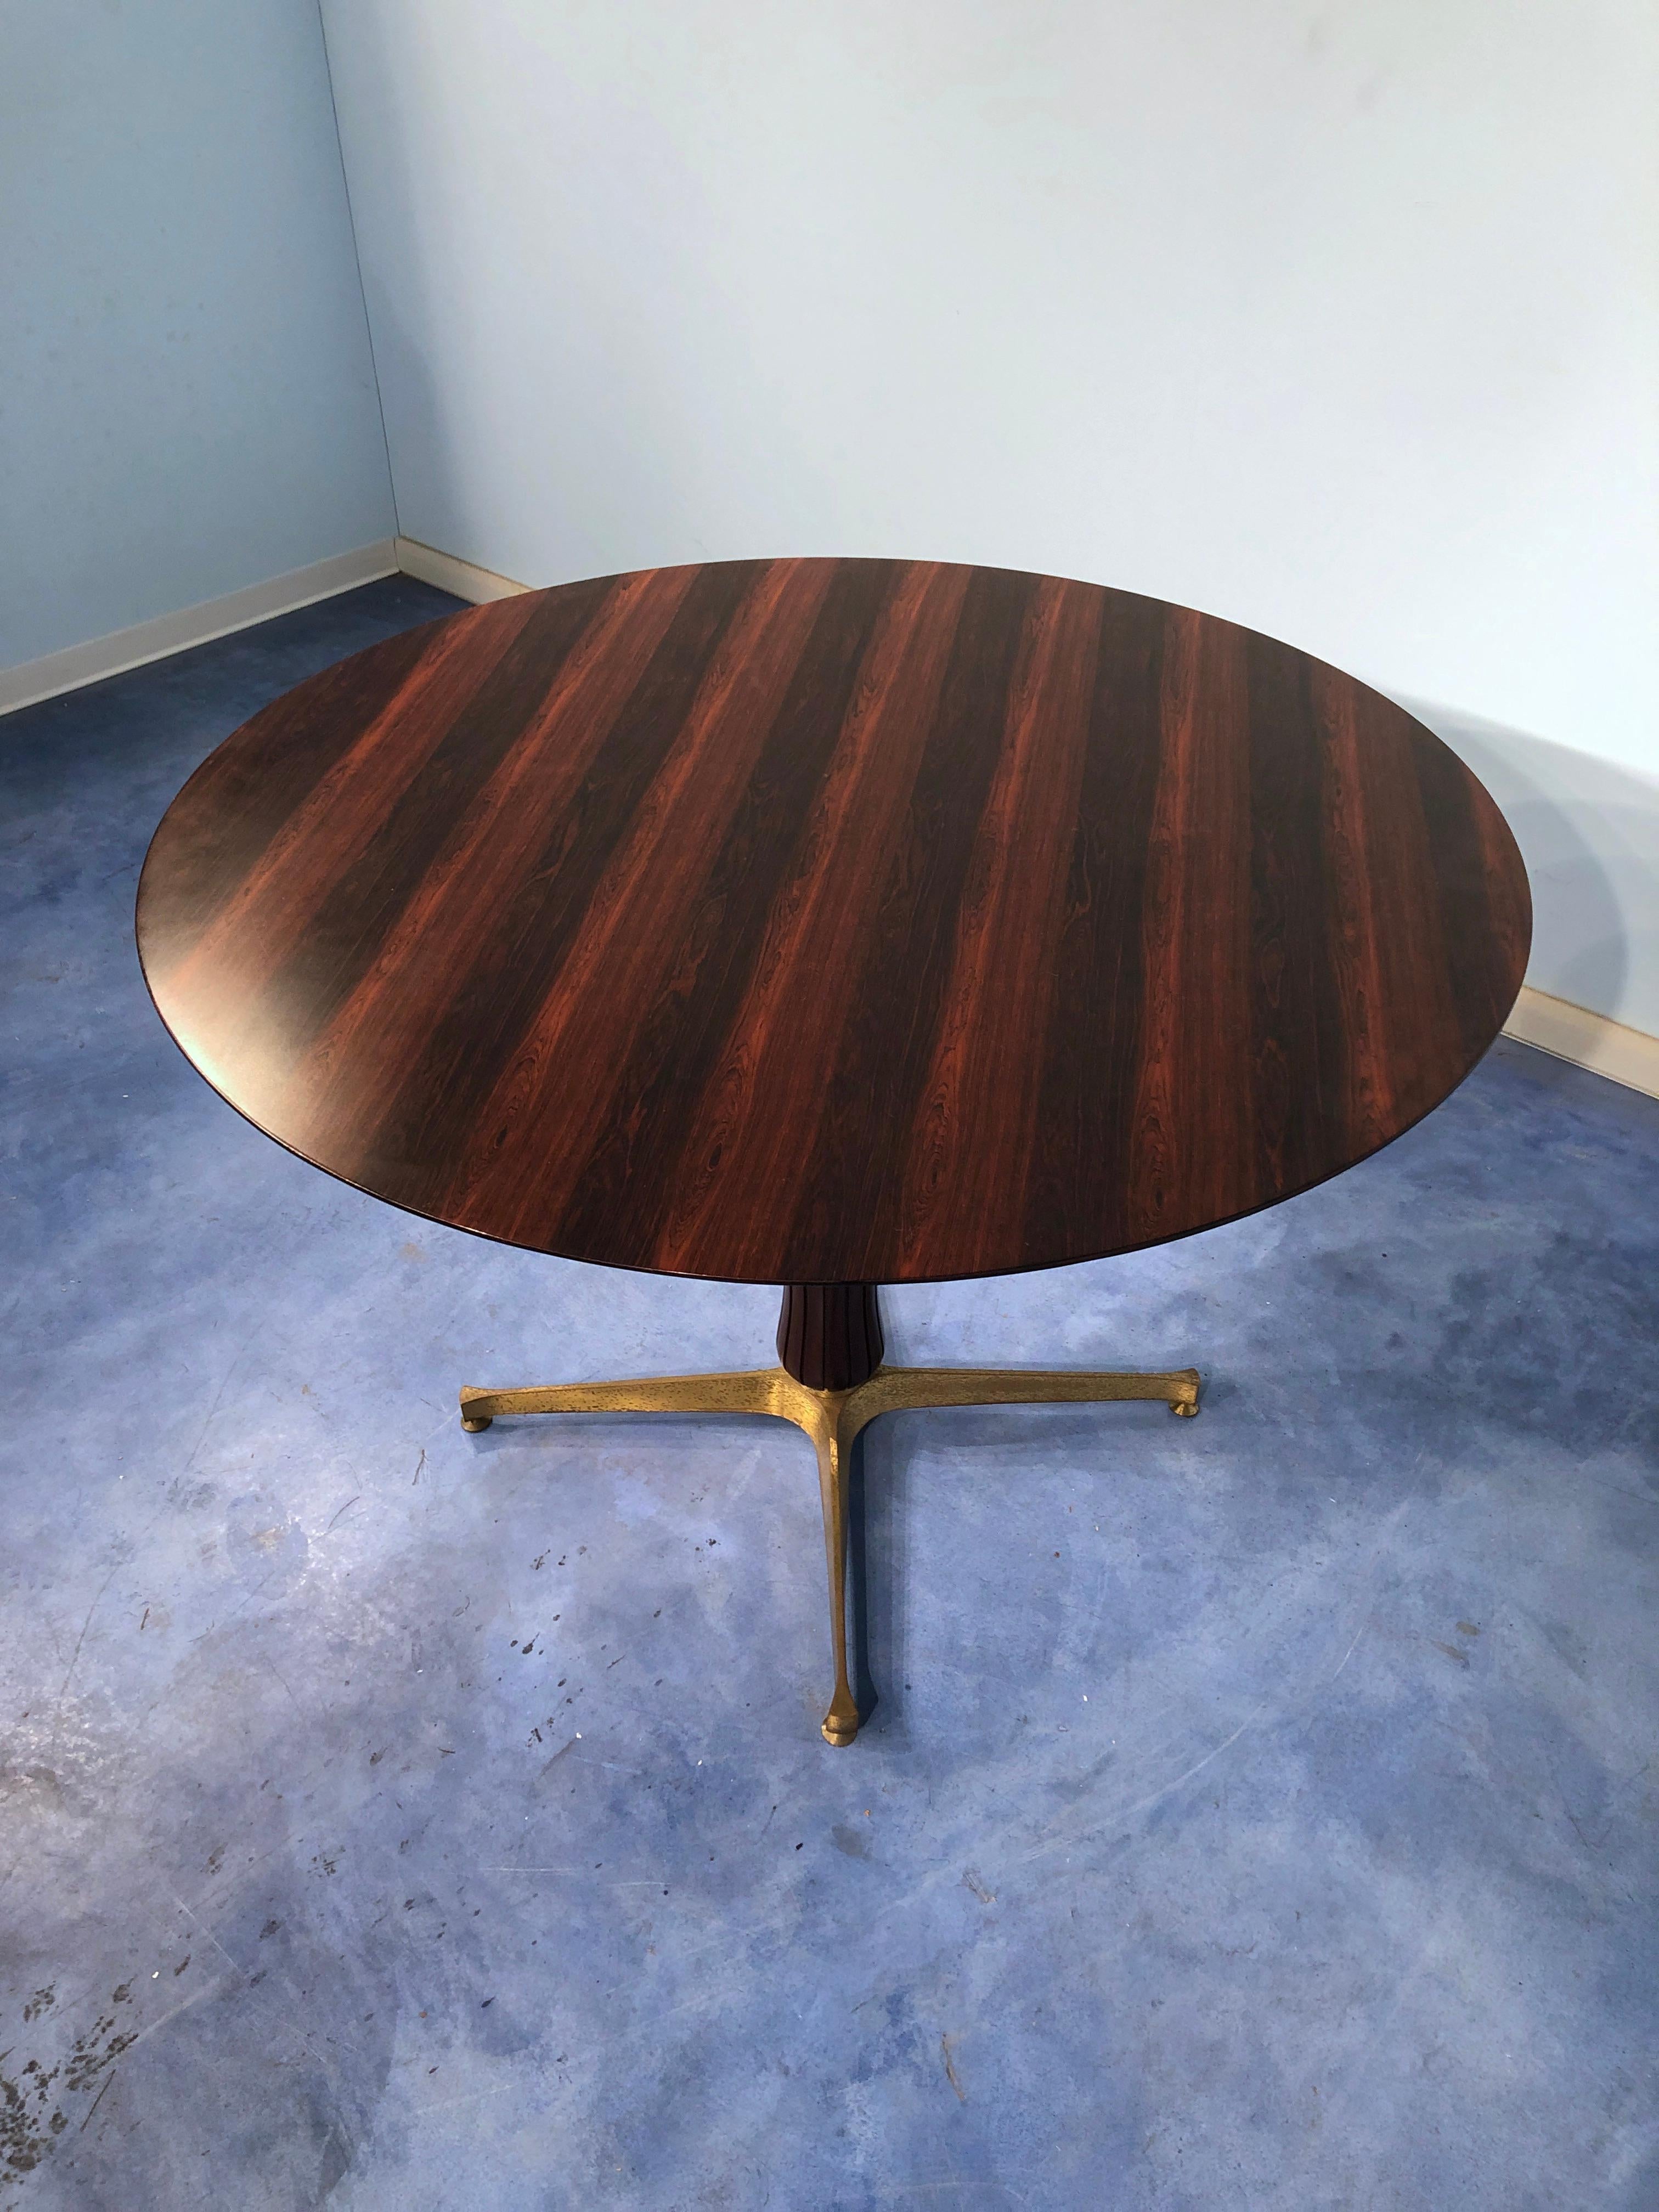 Italian Midcentury Teak Table Attributed to Paolo Buffa, 1950s For Sale 3